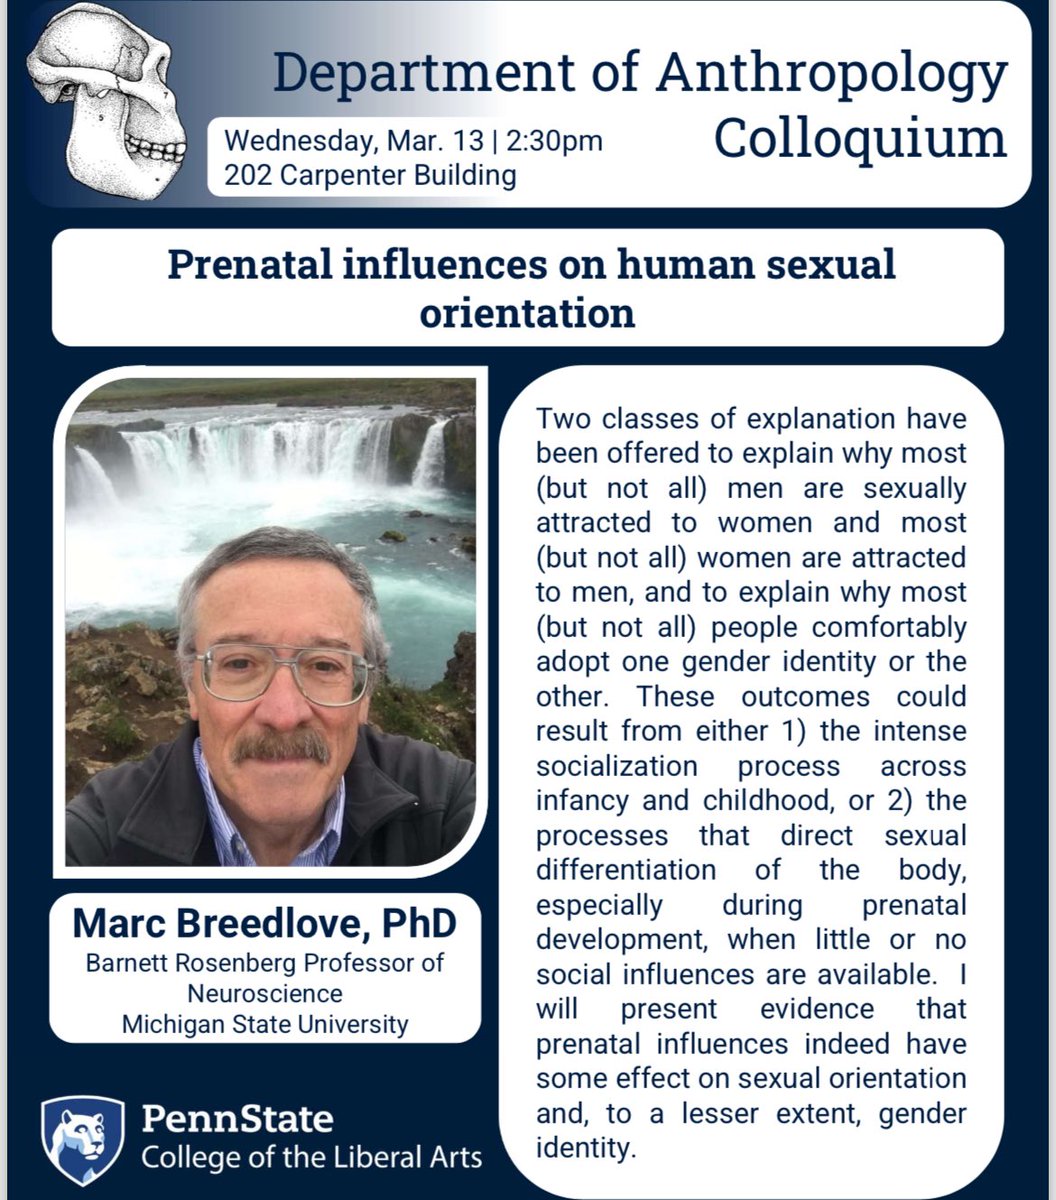 Join us for a special CHED co-sponsored colloquium with Marc Breedlove this Wednesday at 2:30 in 202 Carpenter